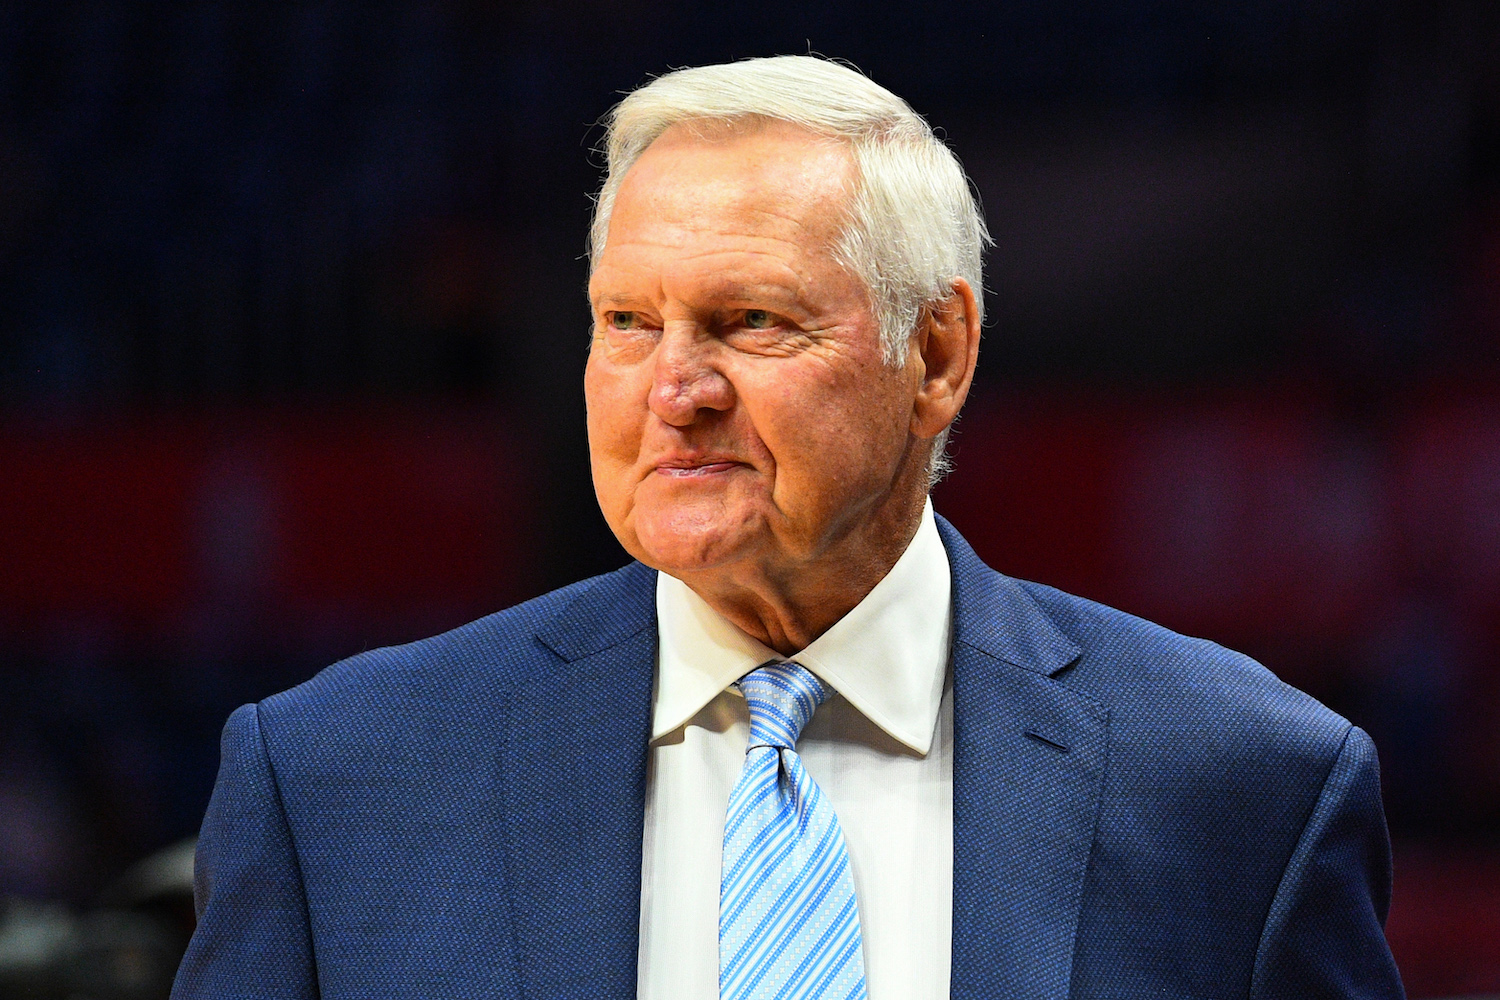 Jerry West played in the NBA before salaries exploded, but you'd never know it from looking at his net worth.